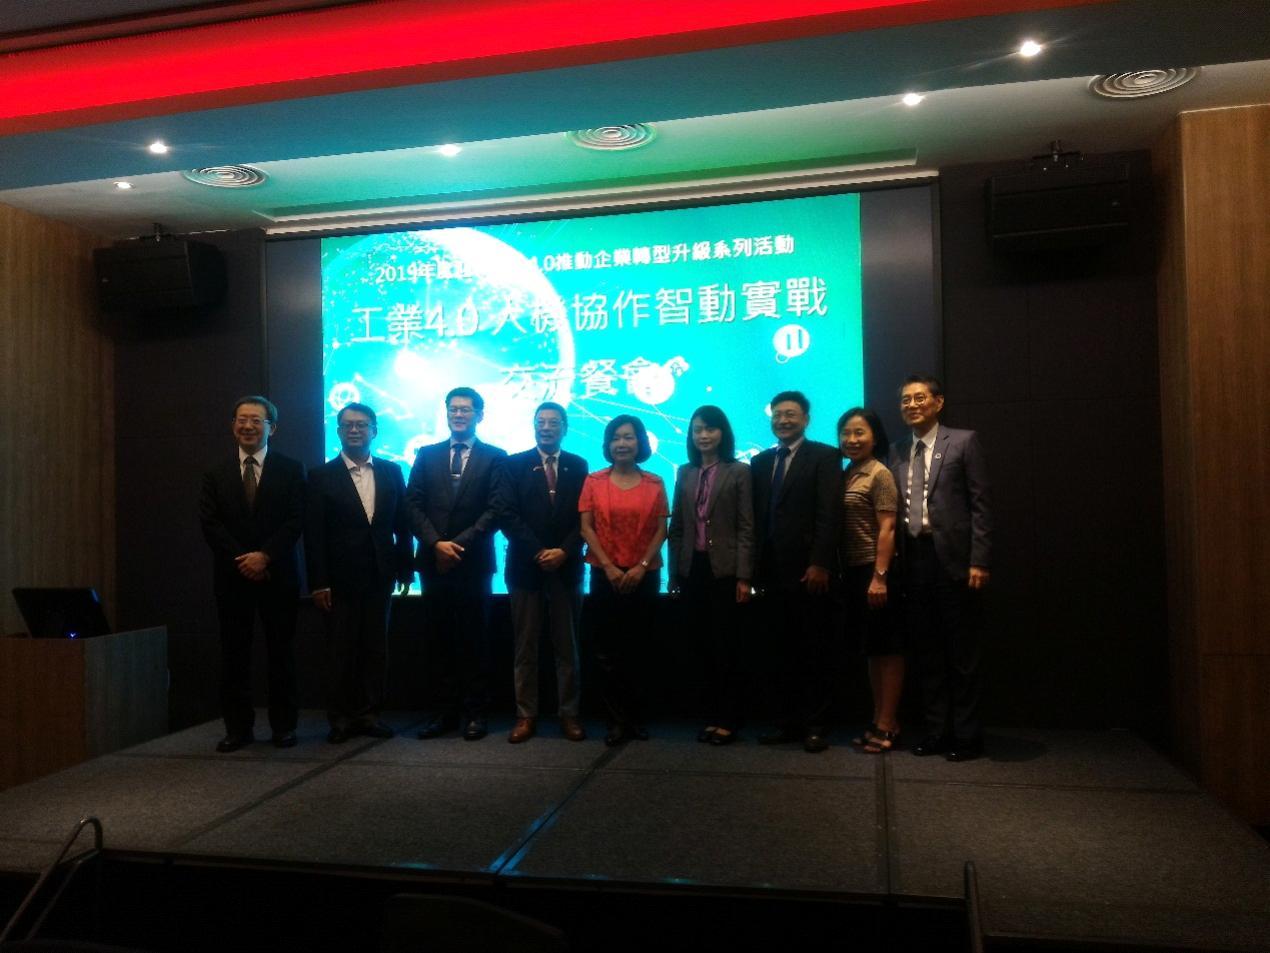 Representative Anne Hung (5th from right) attends the Networking Dinner of “Industrial 4.0~Human-Robot Collaboration Seminar”.
